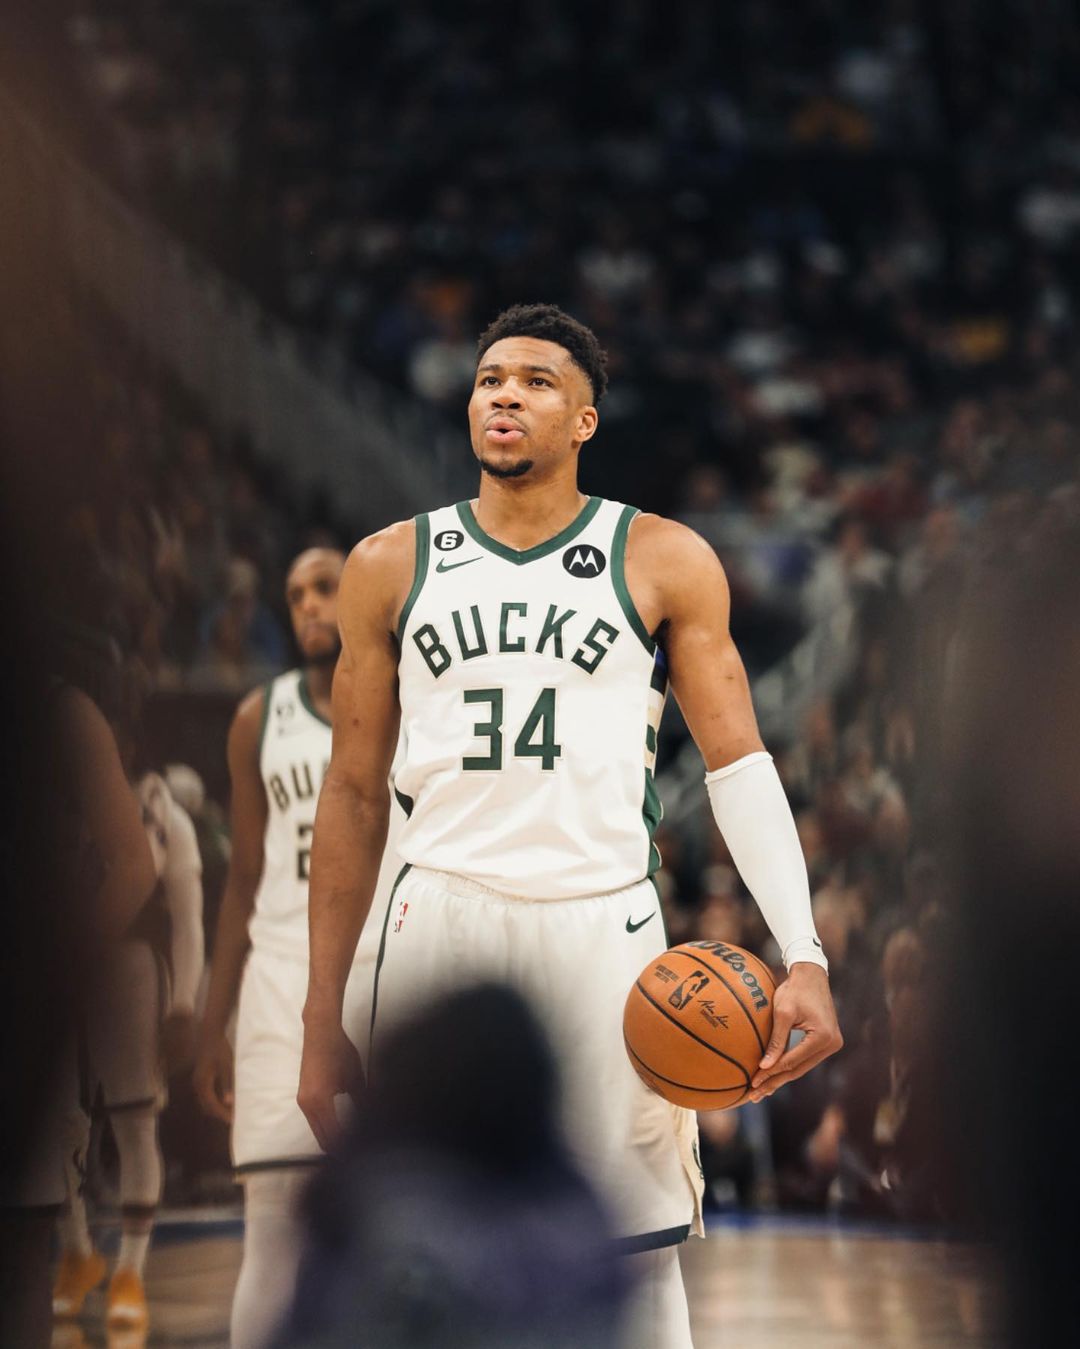 Giannis is currently playing for the NBA Milwaukee Bucks